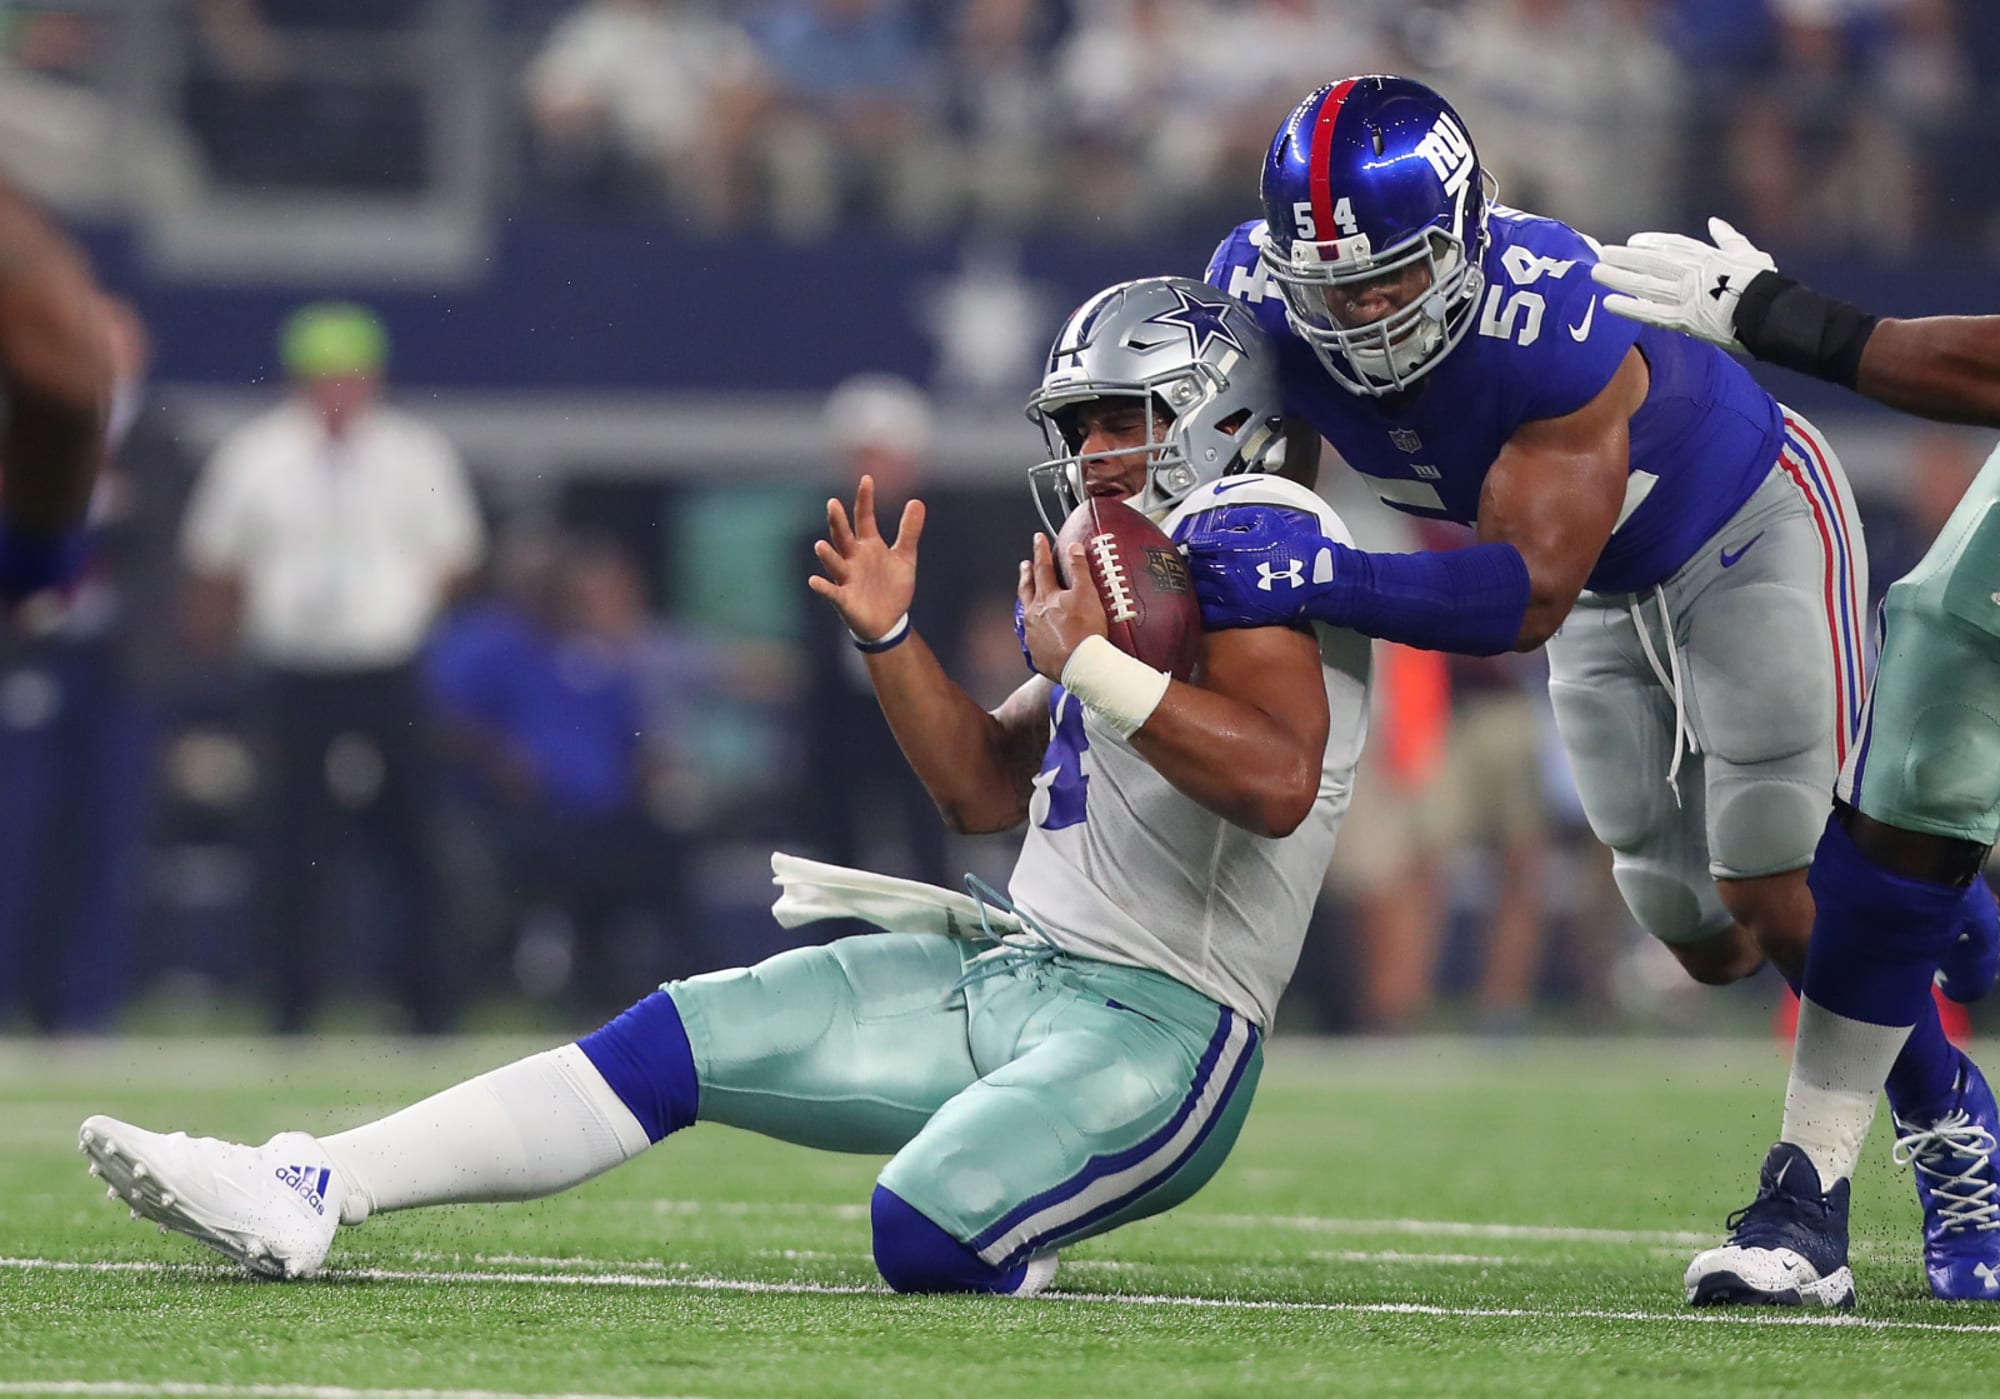 Where will the sacks come from for New York Giants?